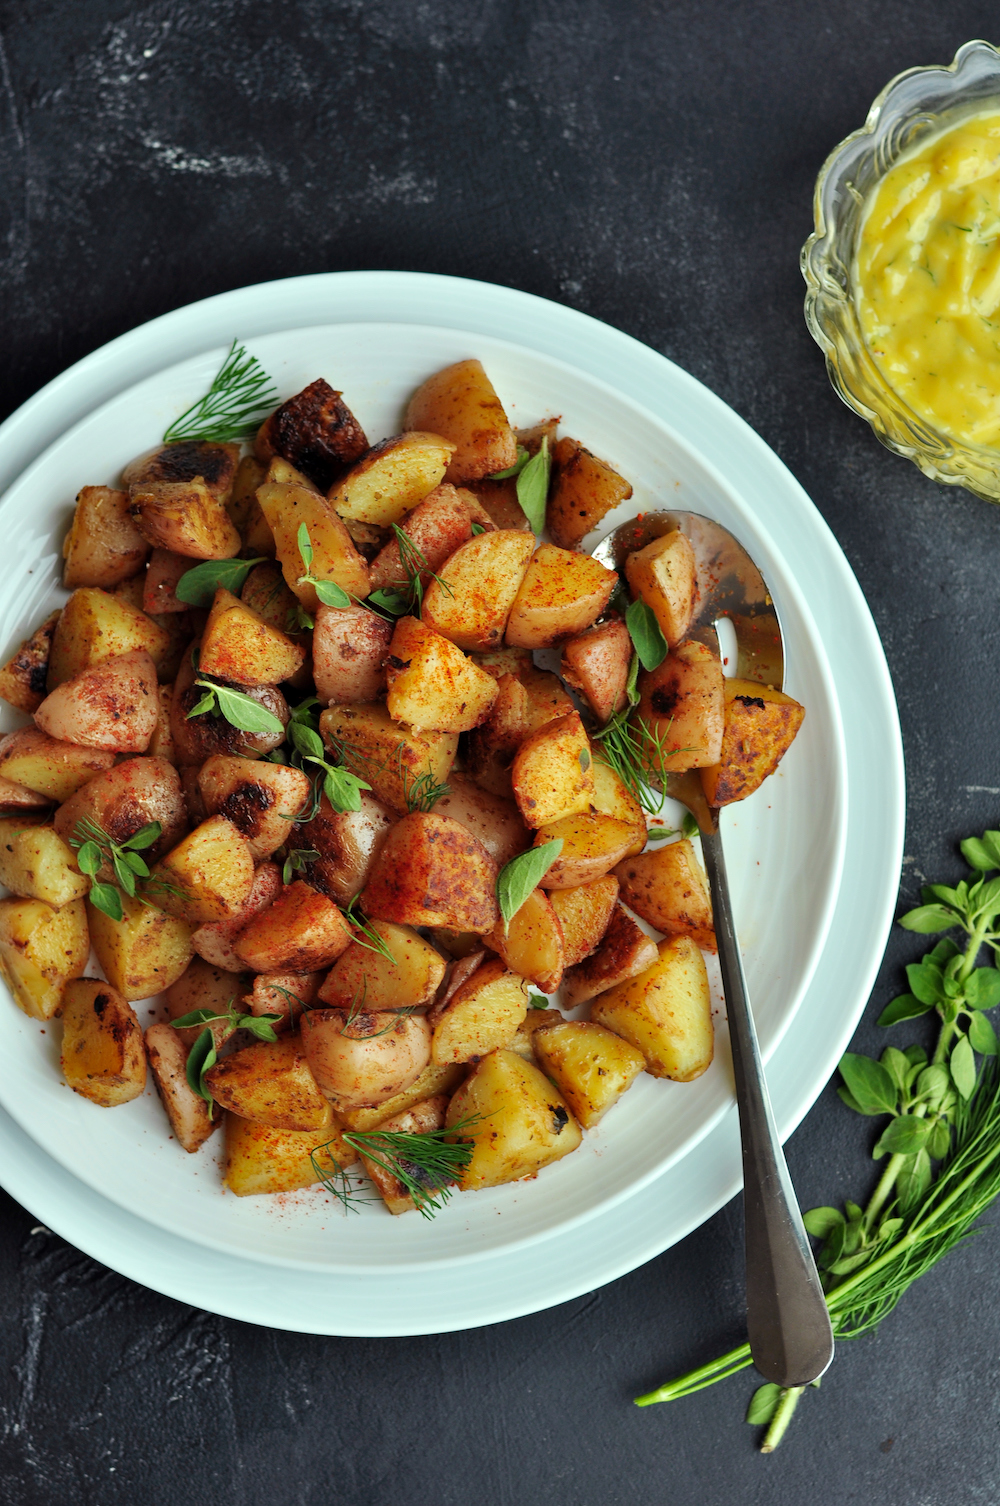 Crispy-skinned sous vide potatoes cooked with garlic-infused oil and smoked paprika. In the unlikely event that you have leftovers, think potato salad.